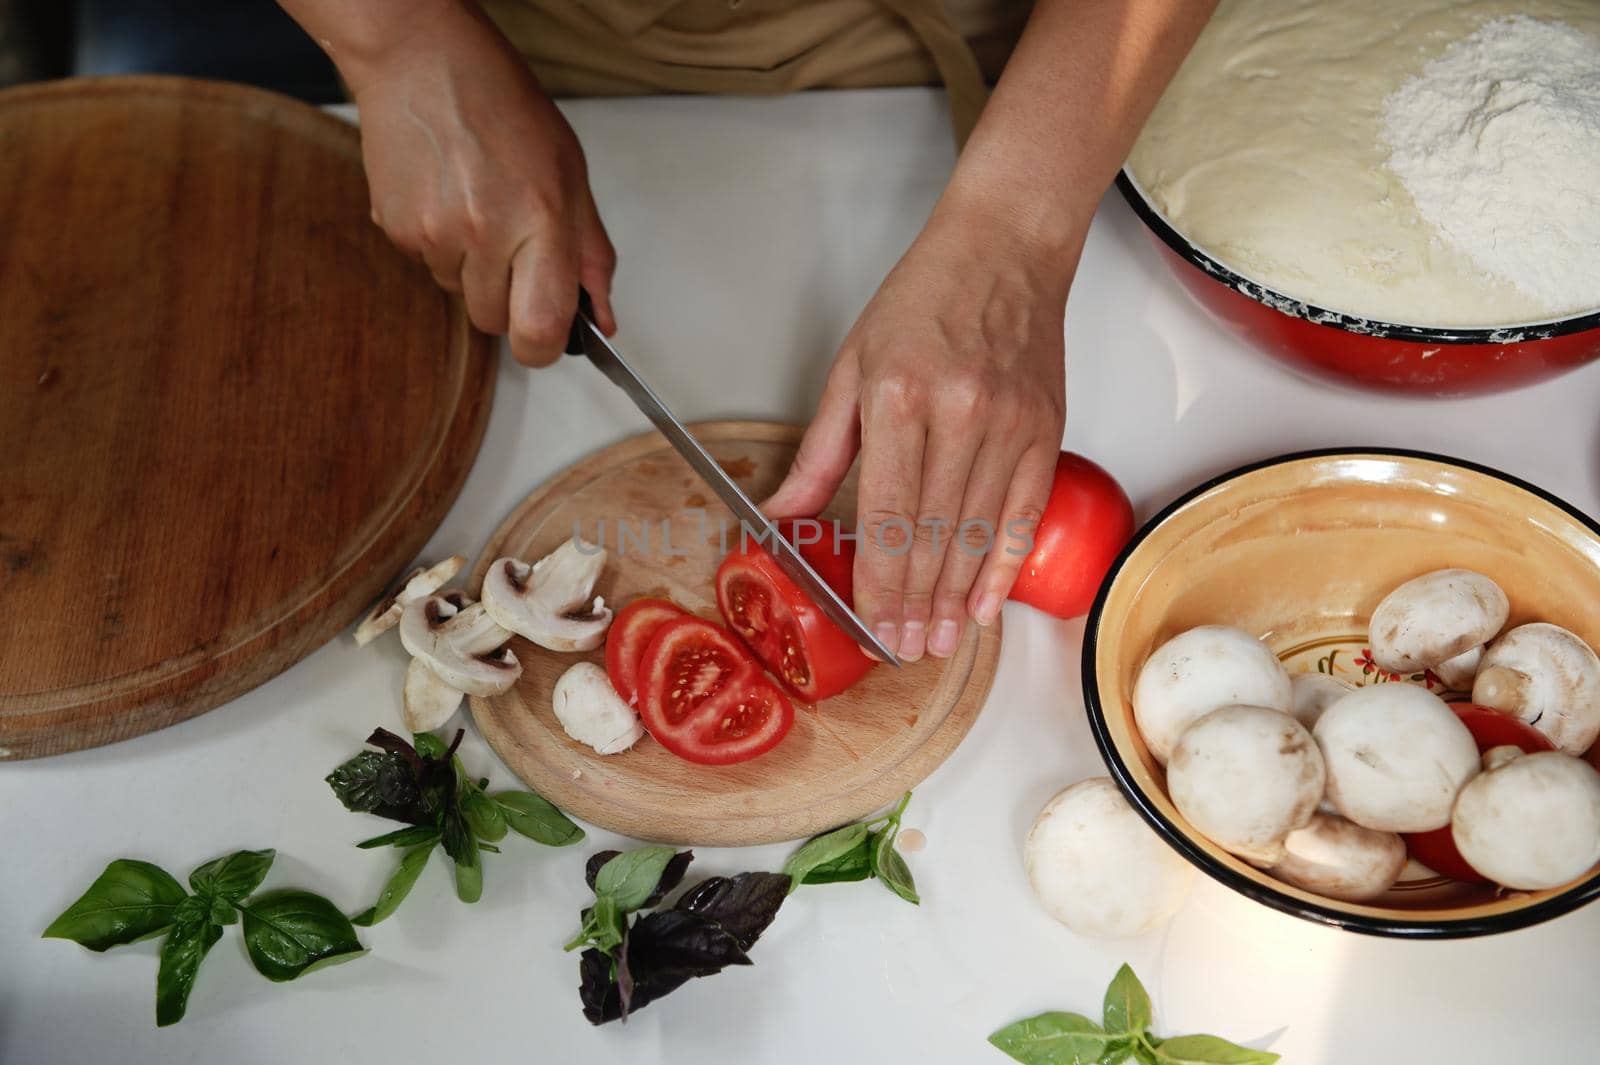 Top view of chef's hands slicing fresh ripe tomatoes with kitchen knife on cutting board, next to chopped mushrooms and basil leaves on table while preparing vegetarian healthy food in rustic kitchen